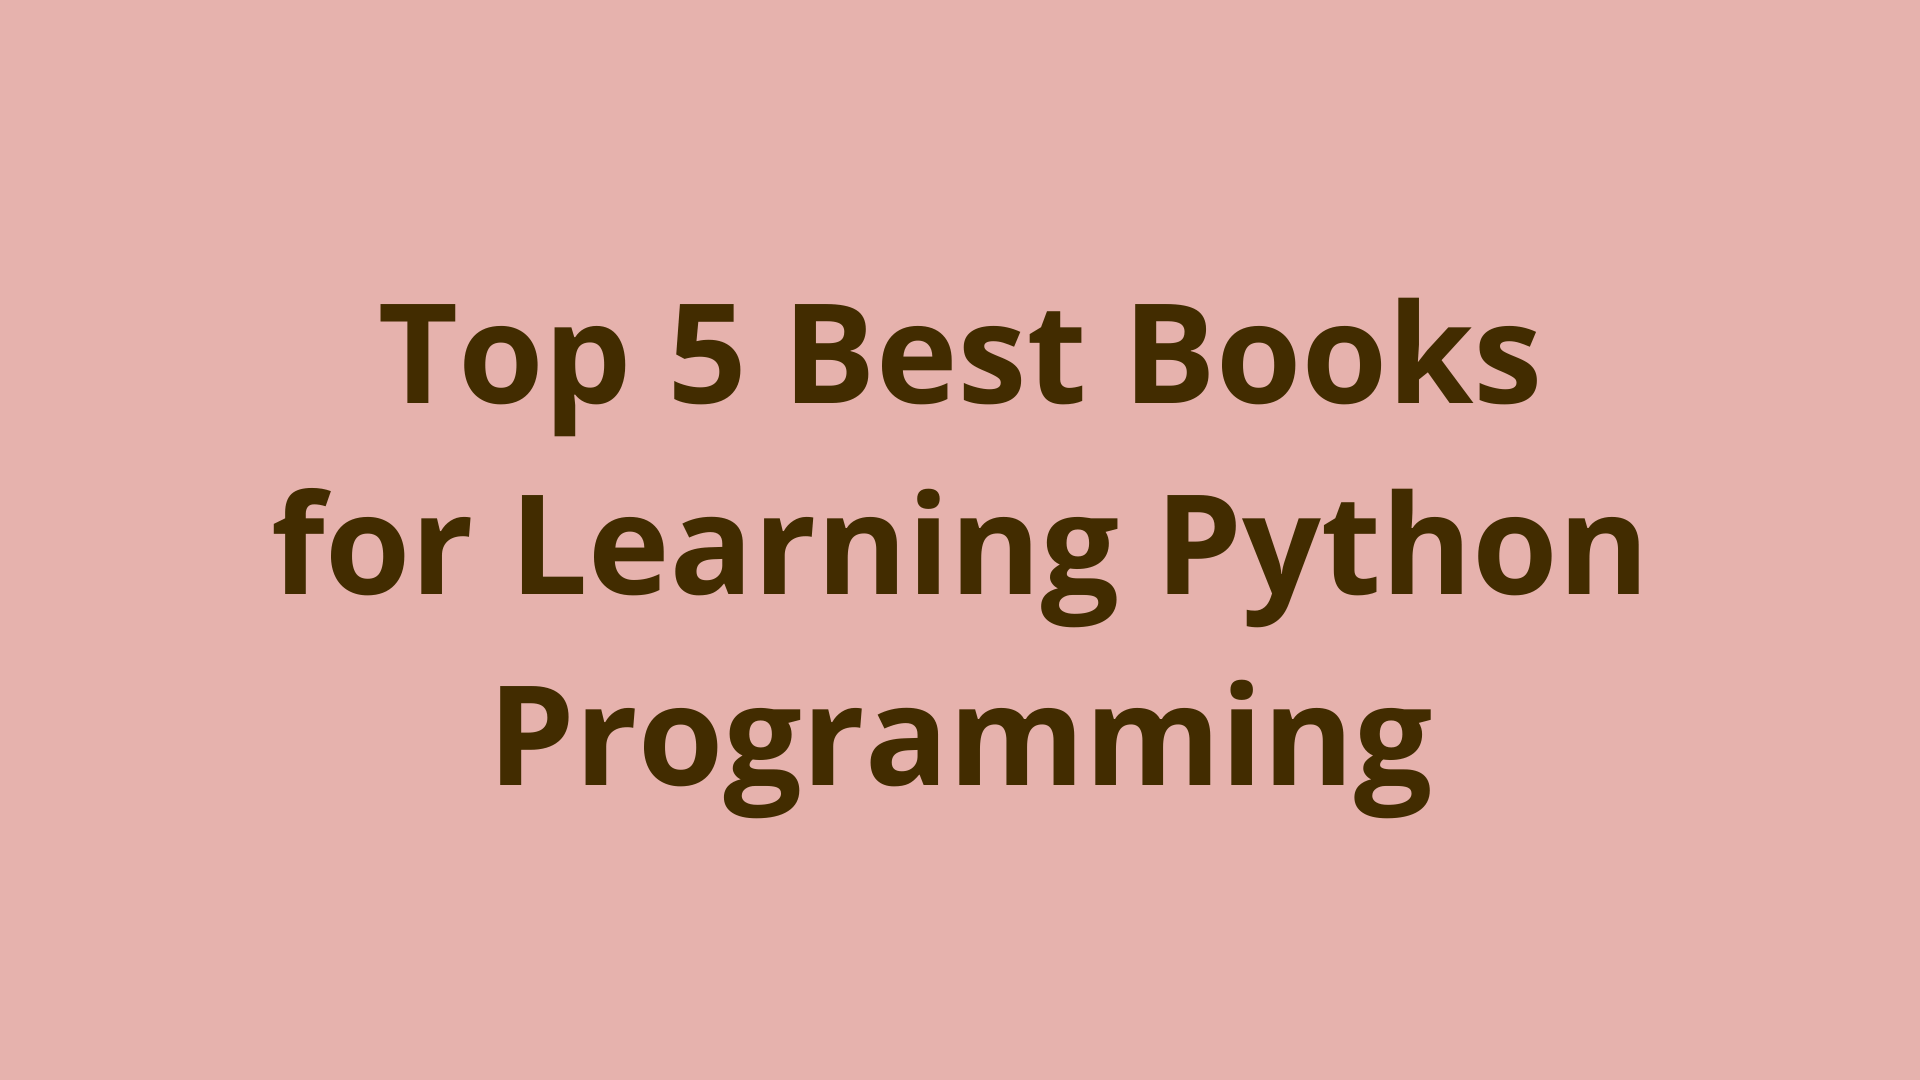 Image of Top 5 best books for learning Python programming